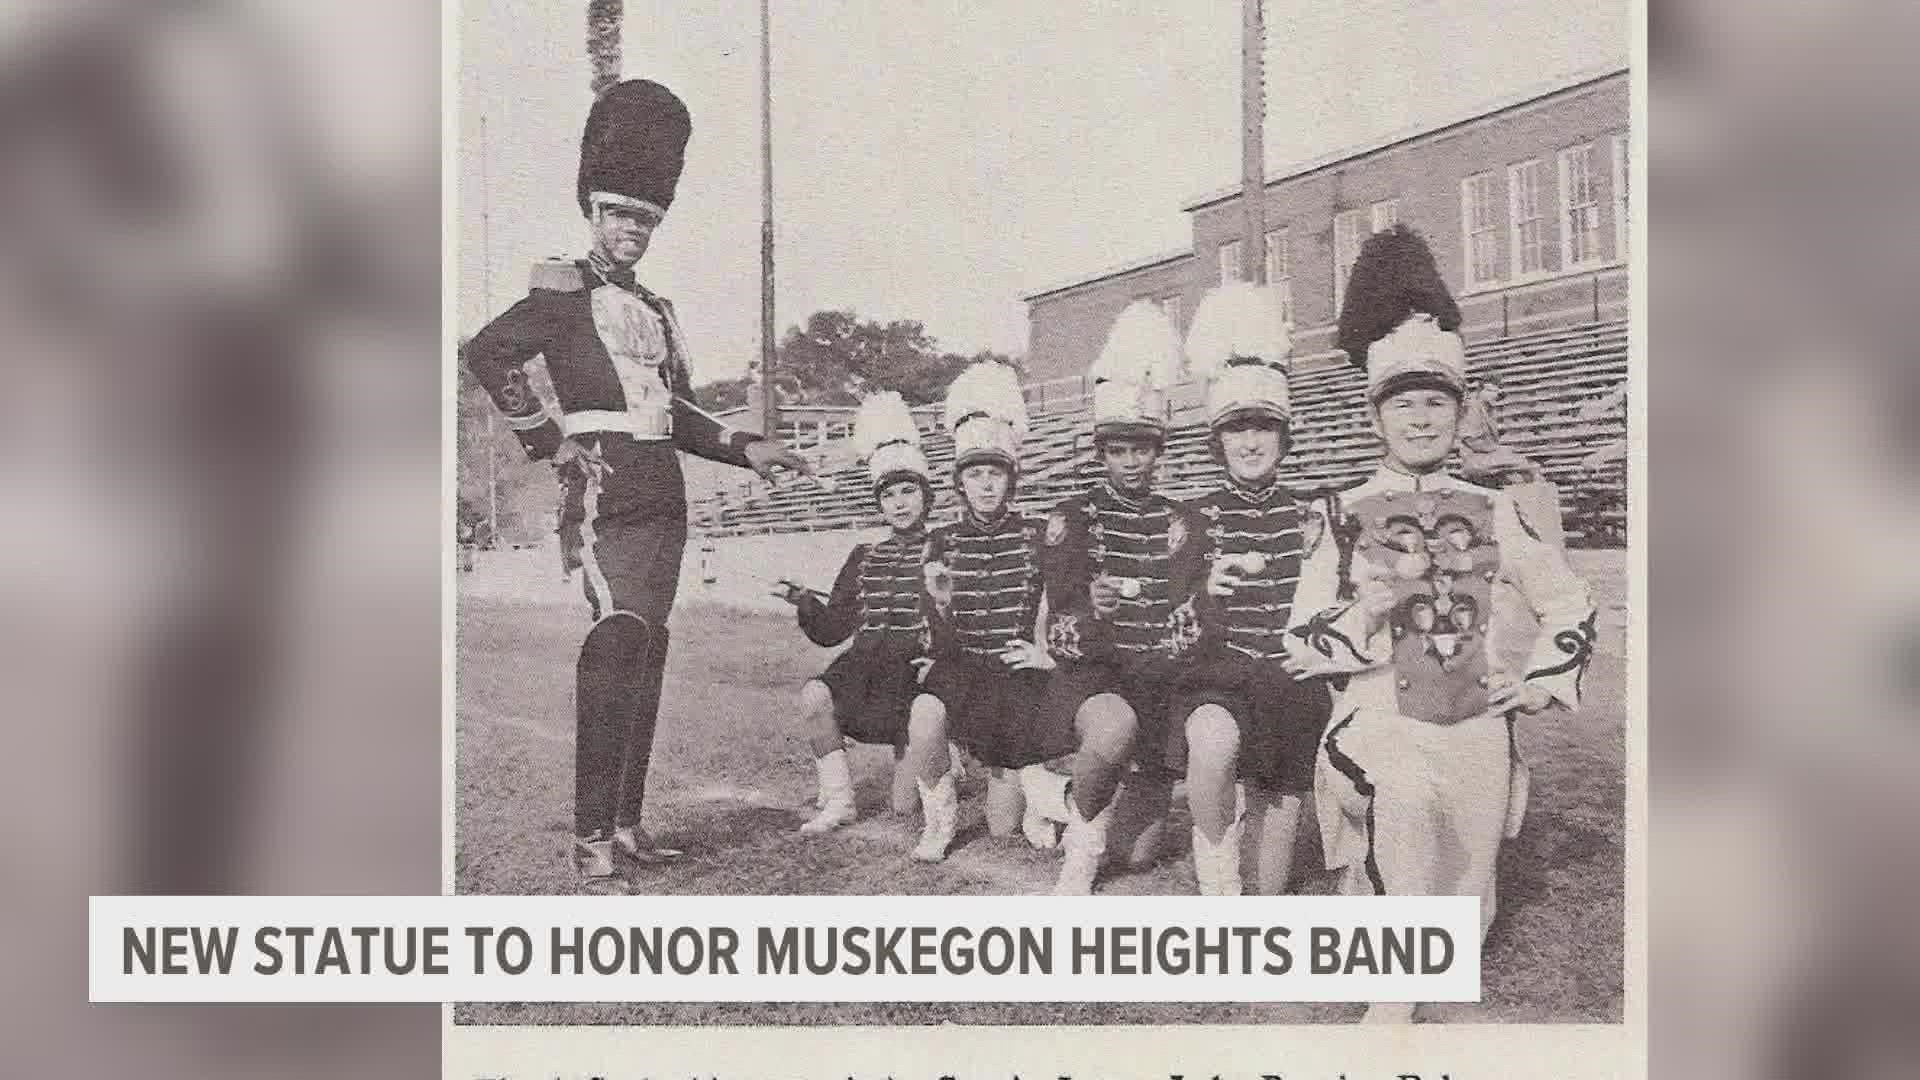 Floyd Cook Jr. designed his own uniform when he became the drum major in 1958.